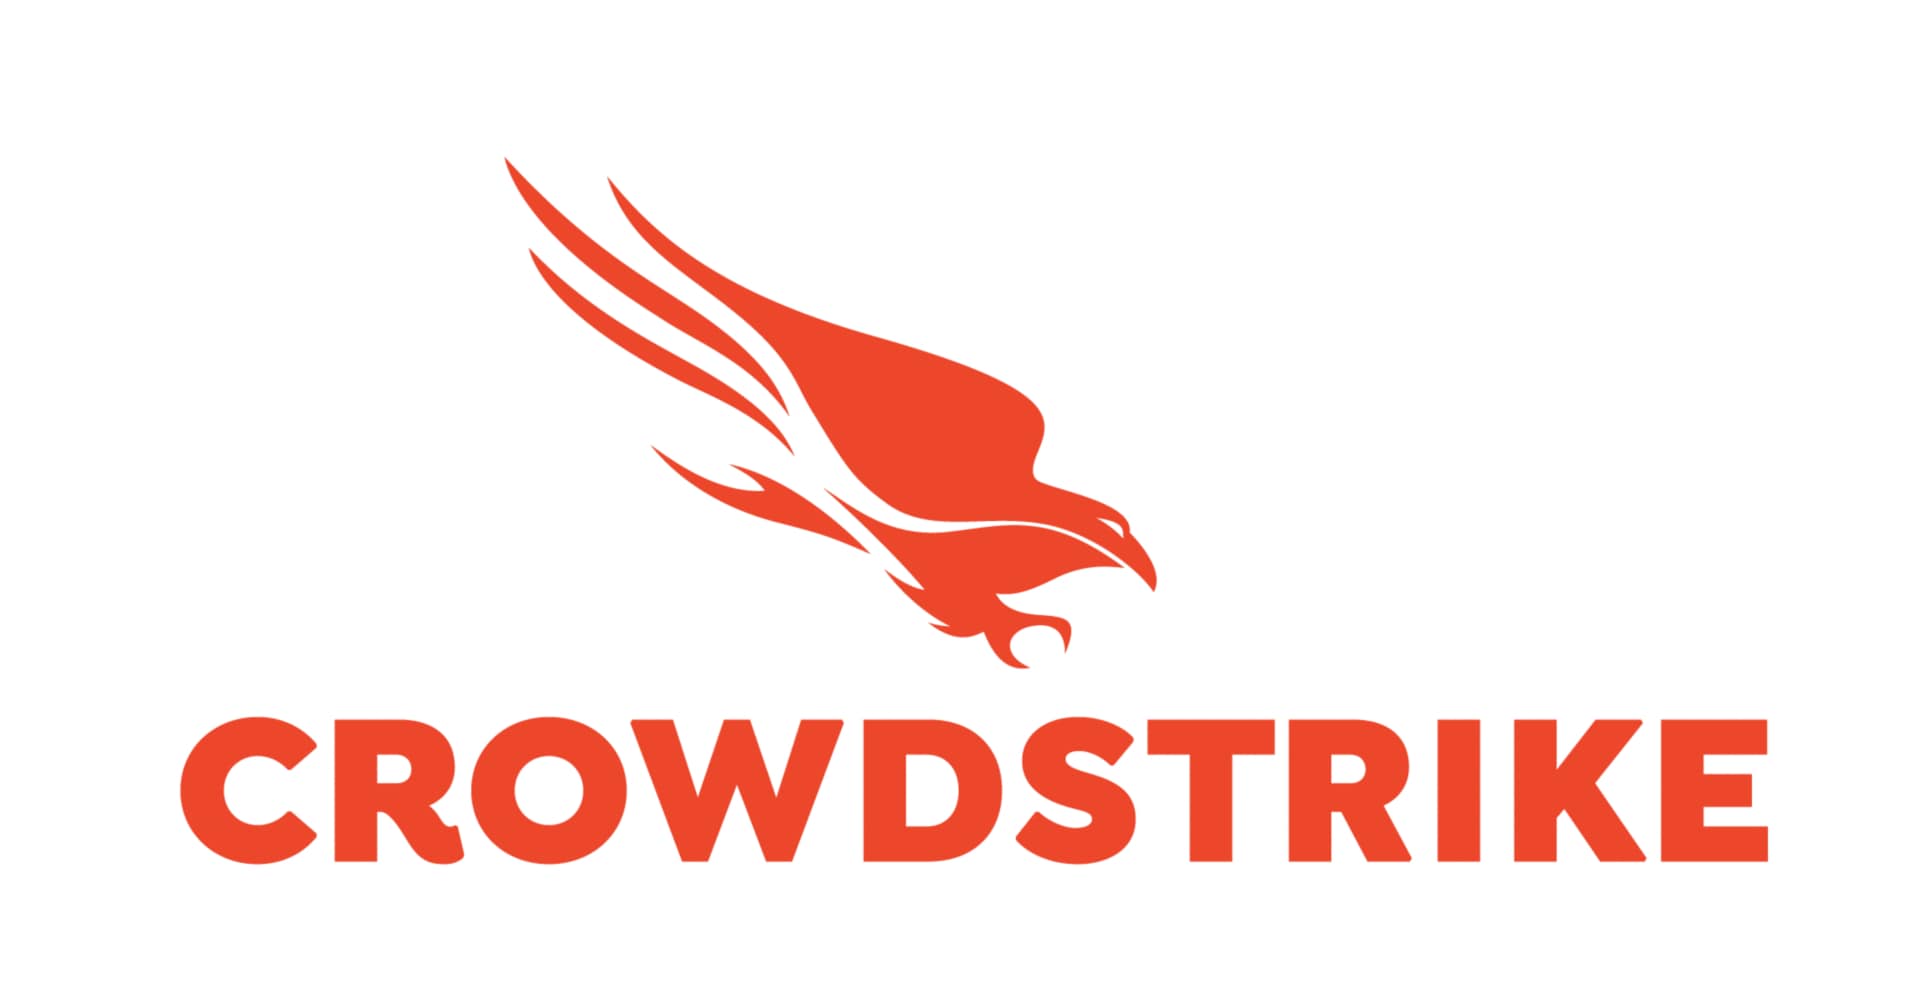 CrowdStrike 3-Month Threat Graph Standard for Mobile (Requires Falcon for Mobile) Software Subscription